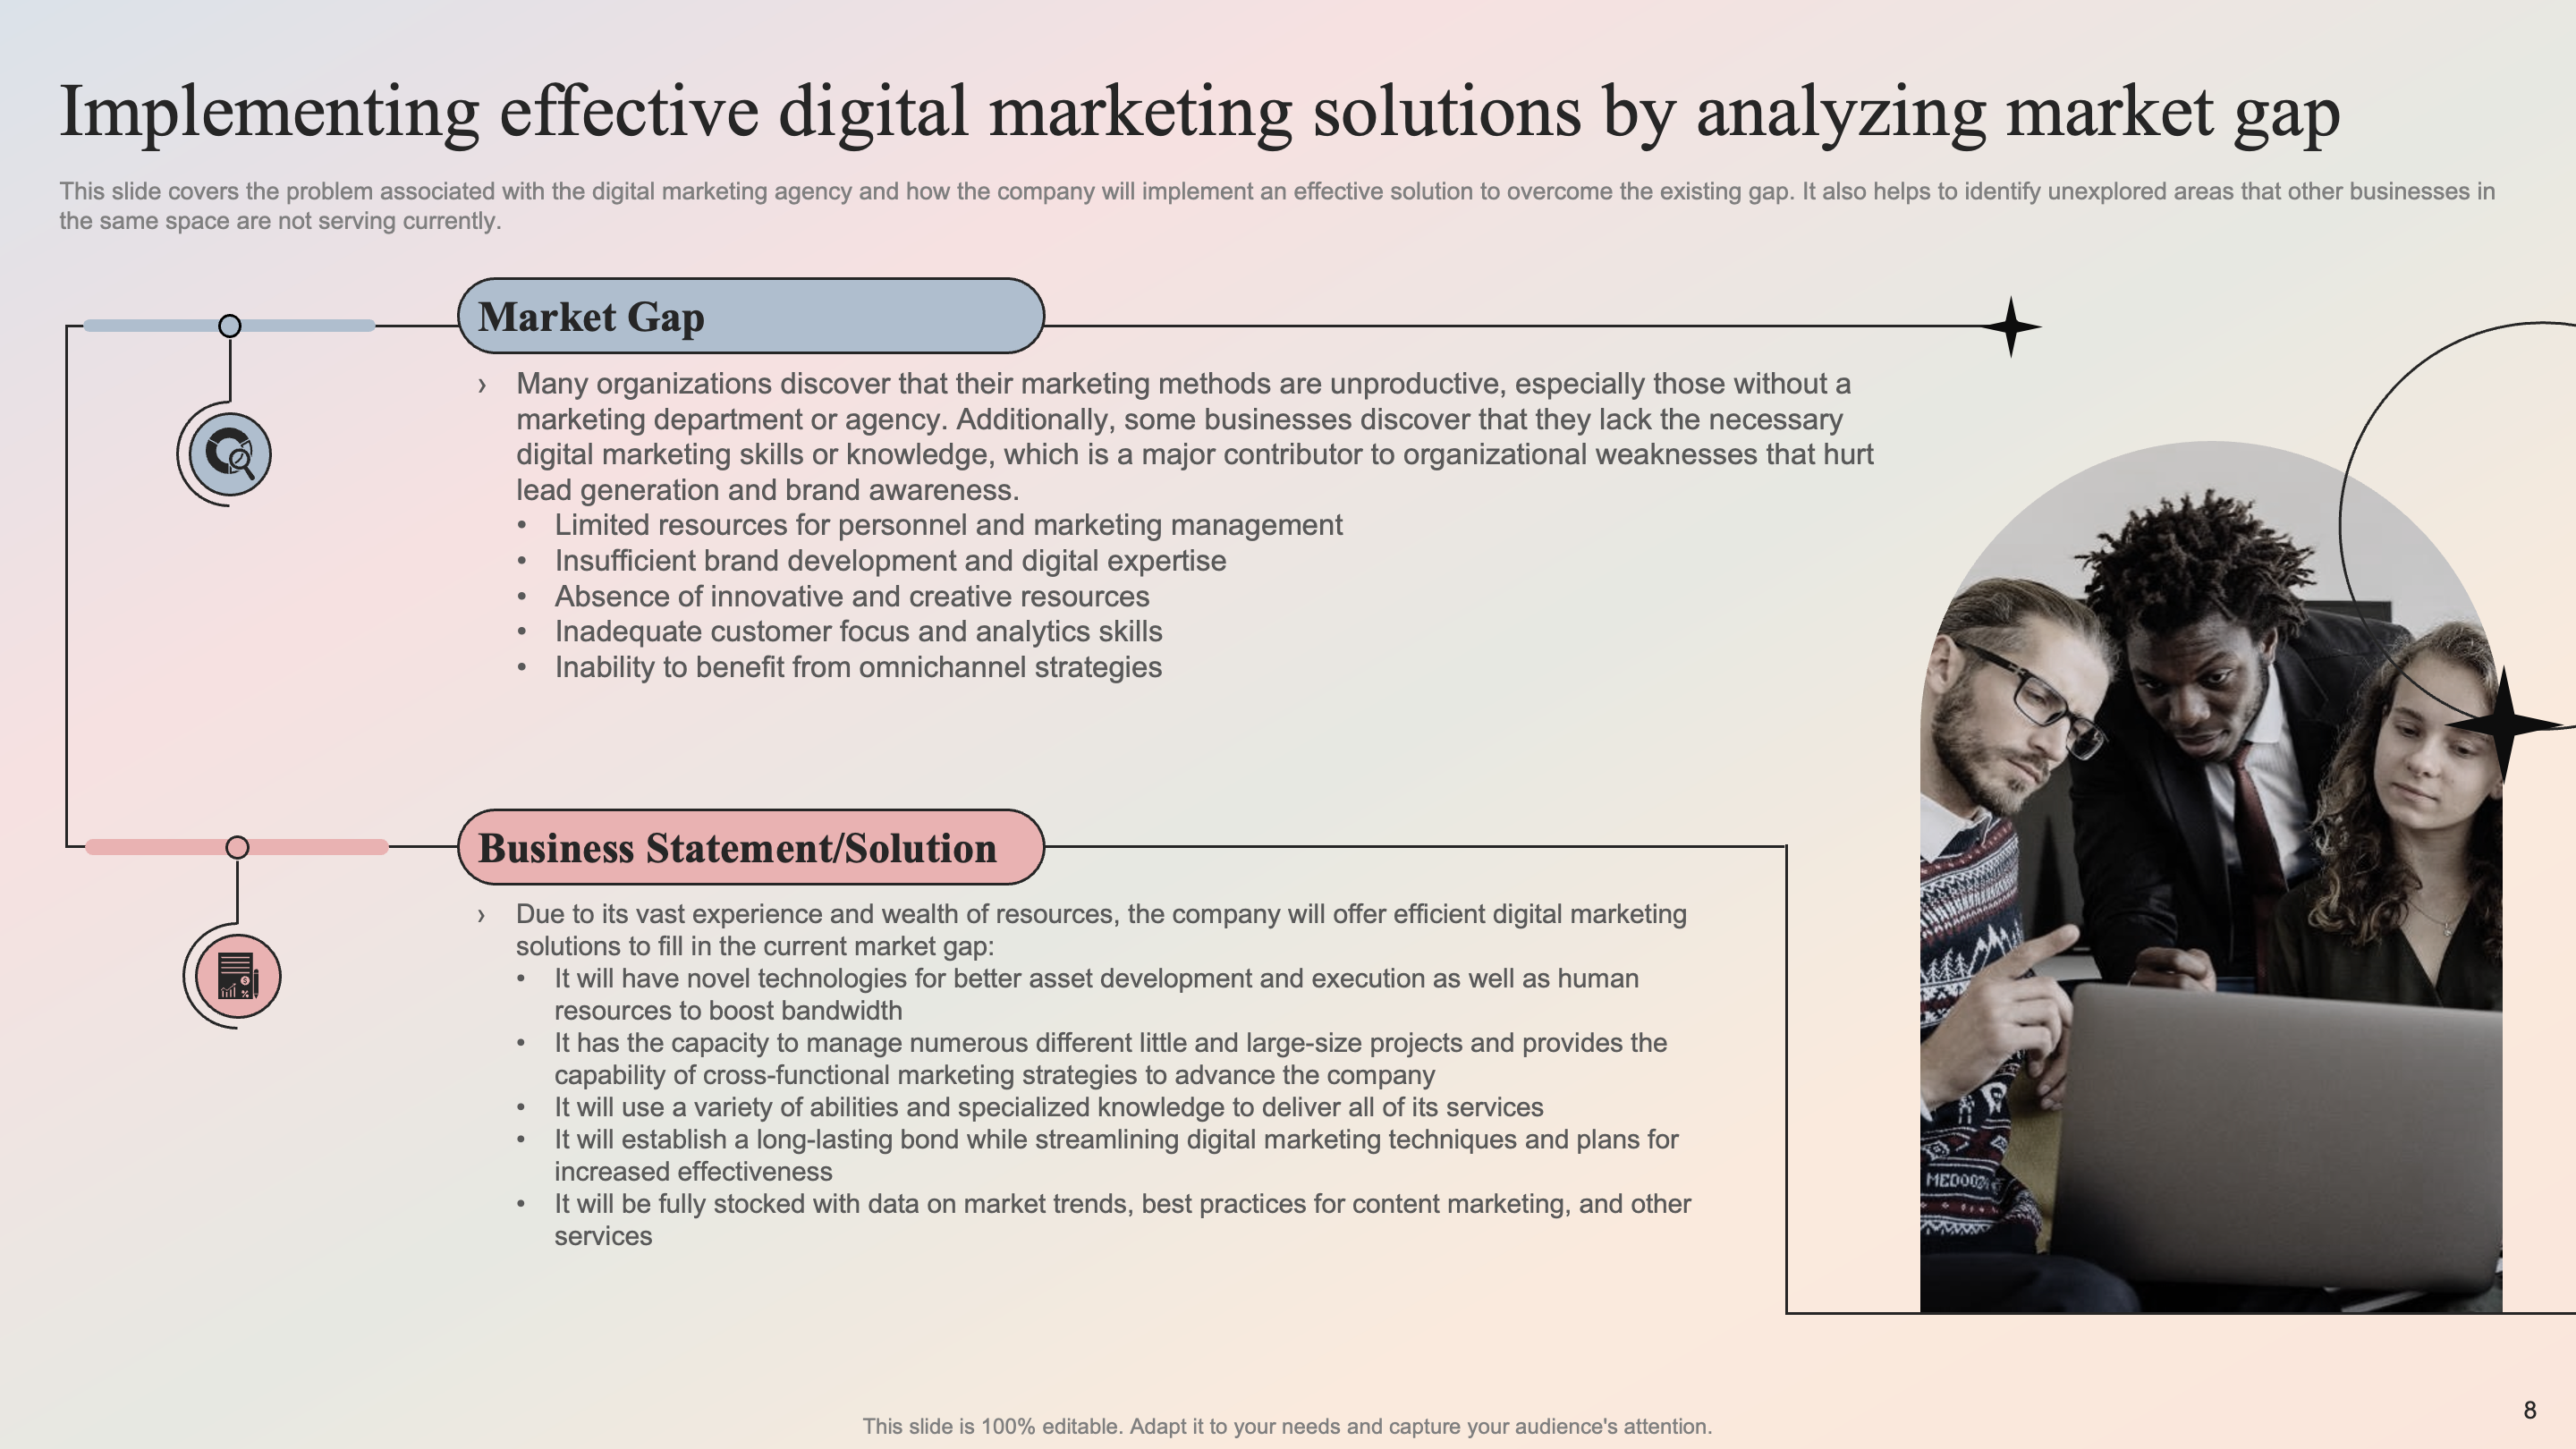 Implementing Effective Digital Marketing Solutions by Analyzing Market Gap